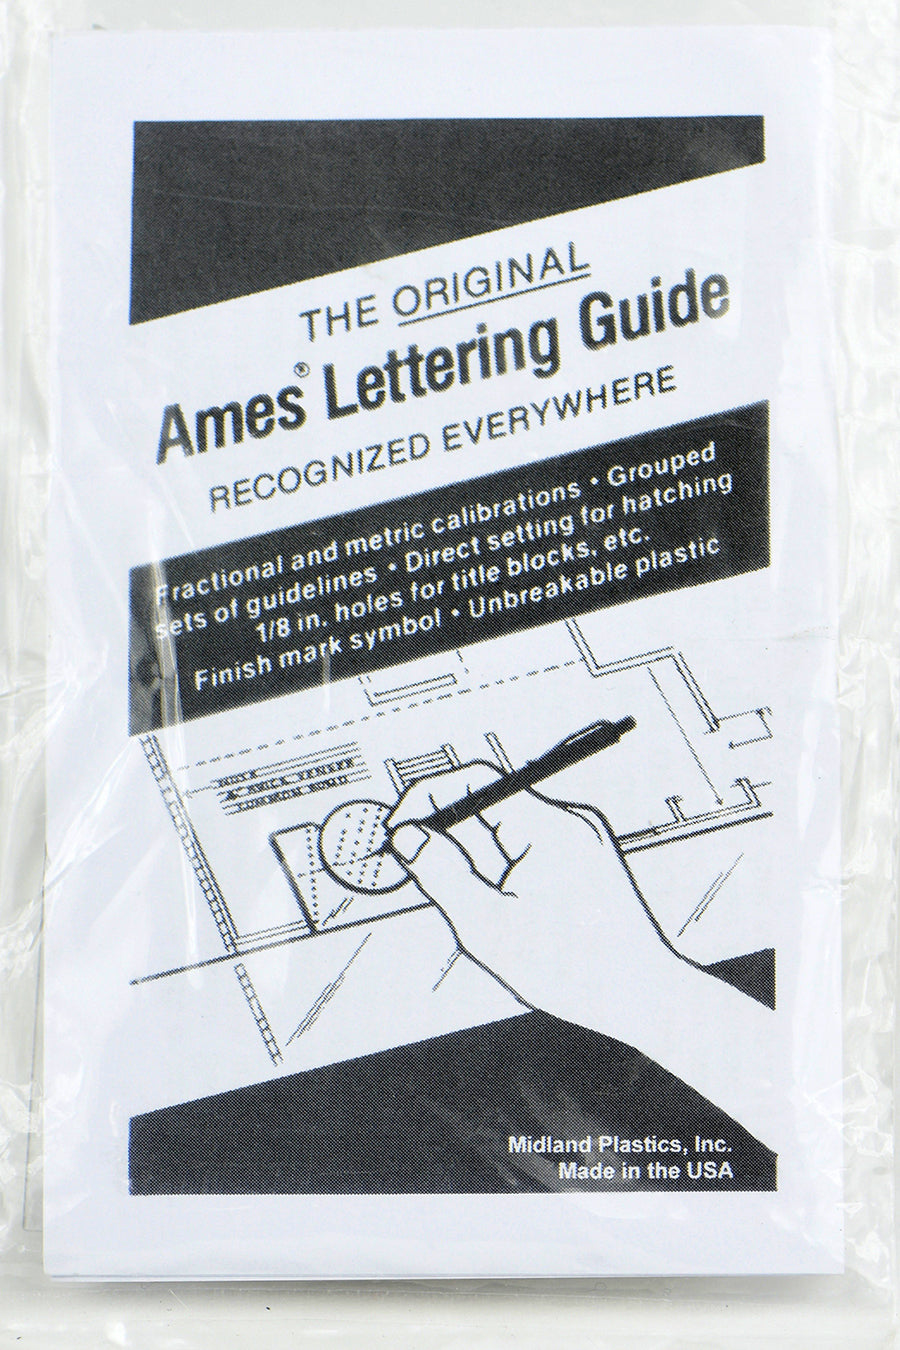 How to Use the Ames Lettering Guide